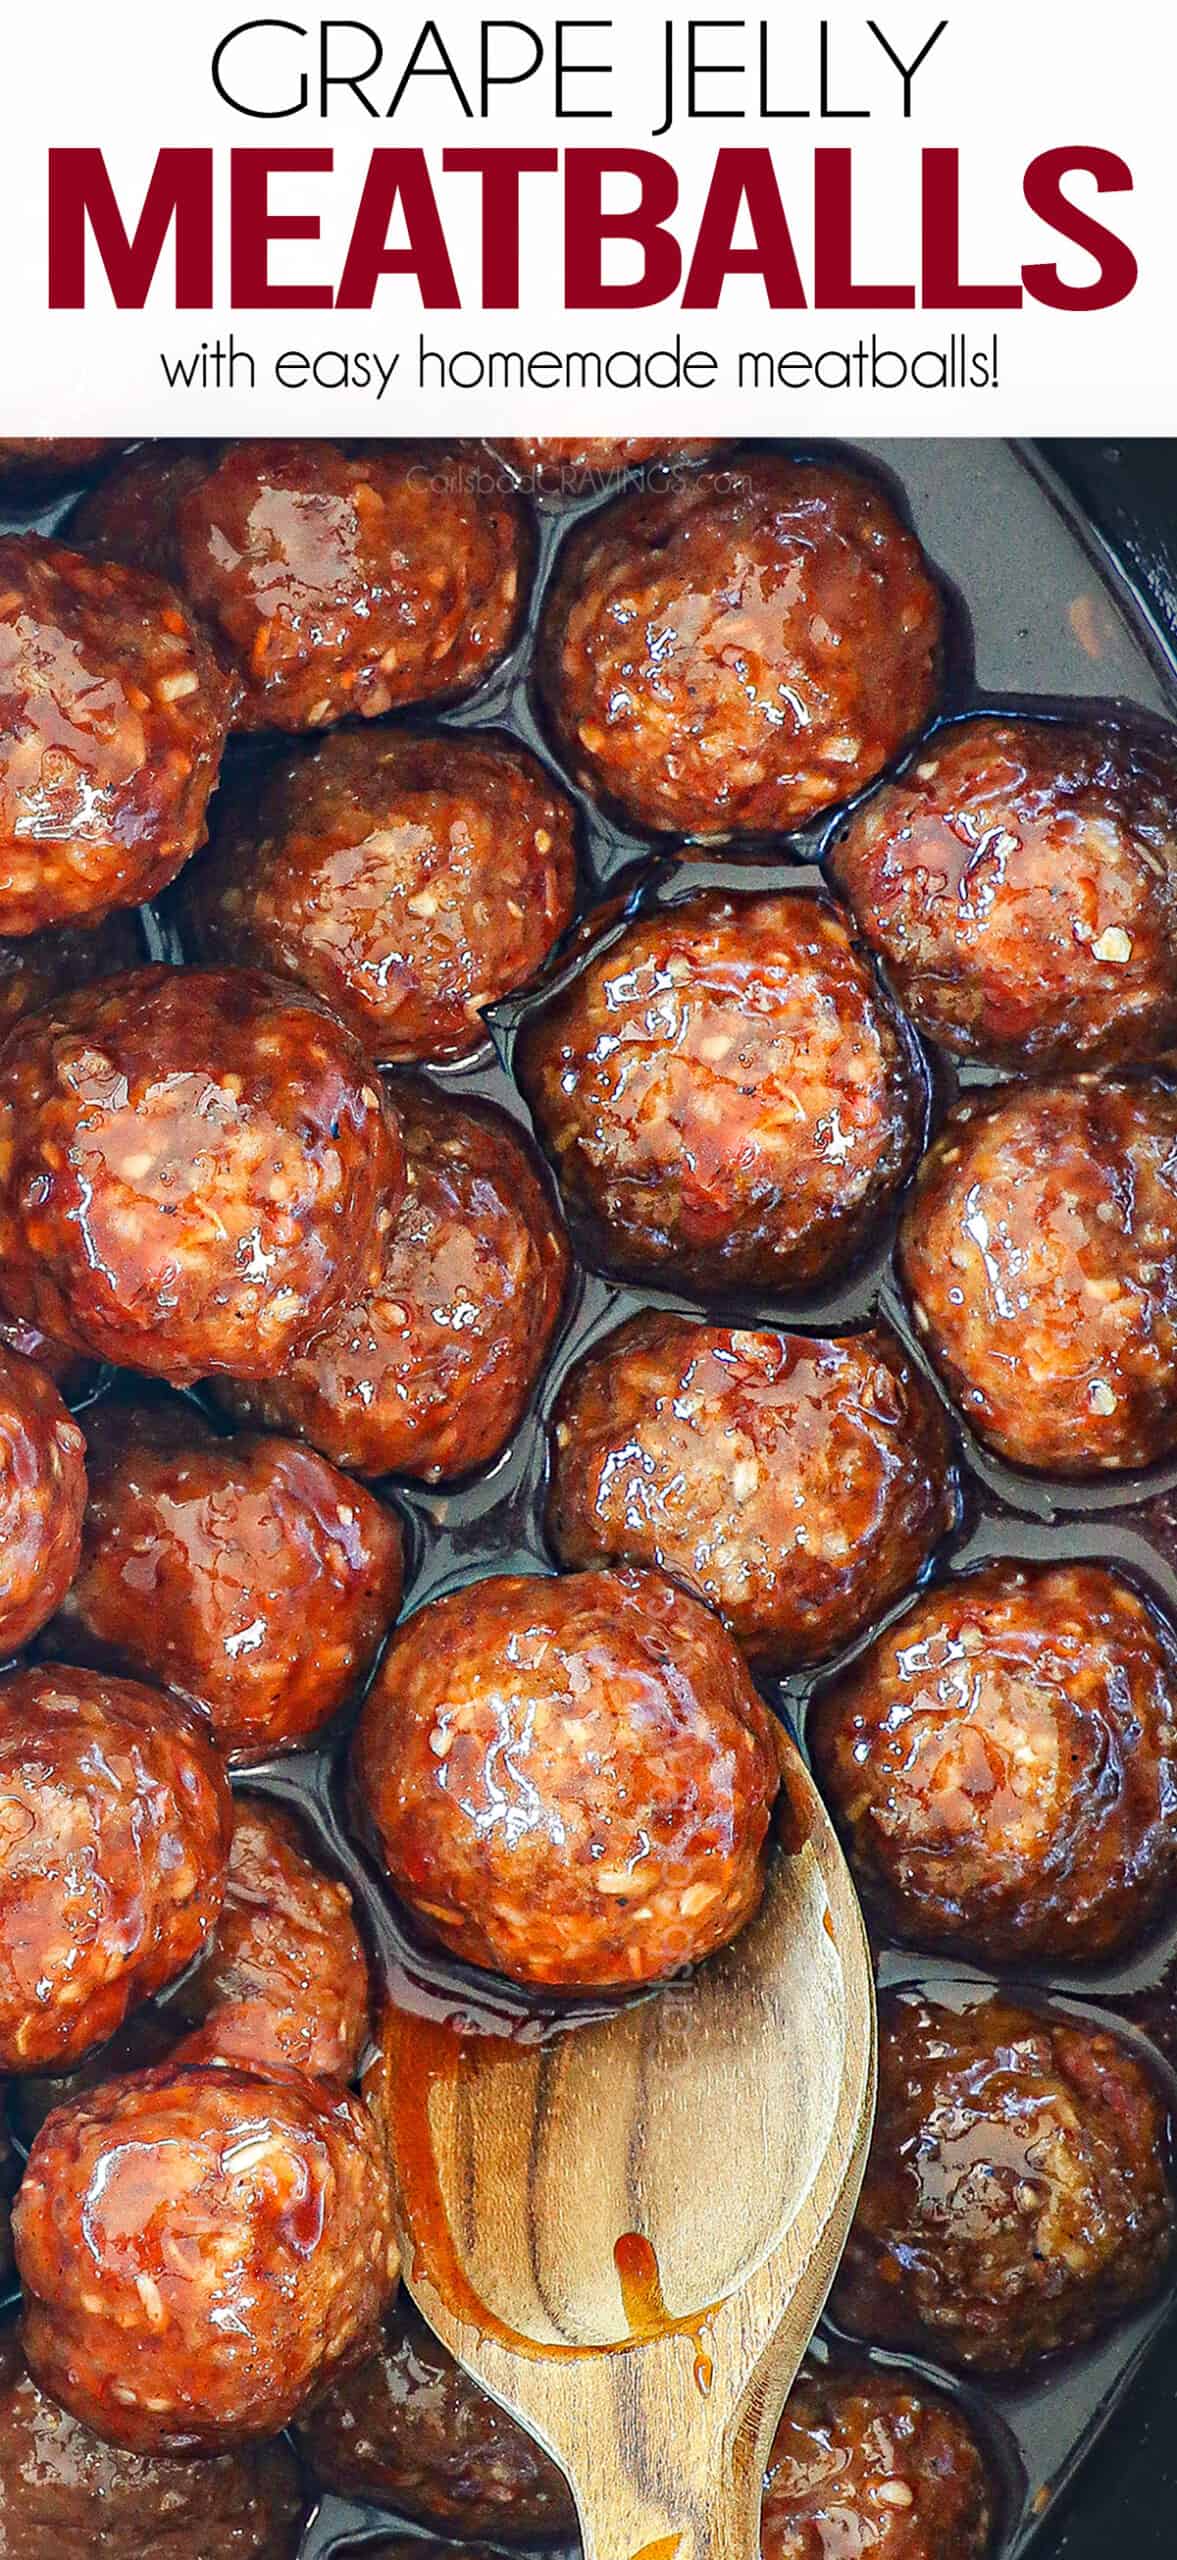 up close of grape jelly meatball recipe by lining meatballs with grape jelly in a crockpot to cook